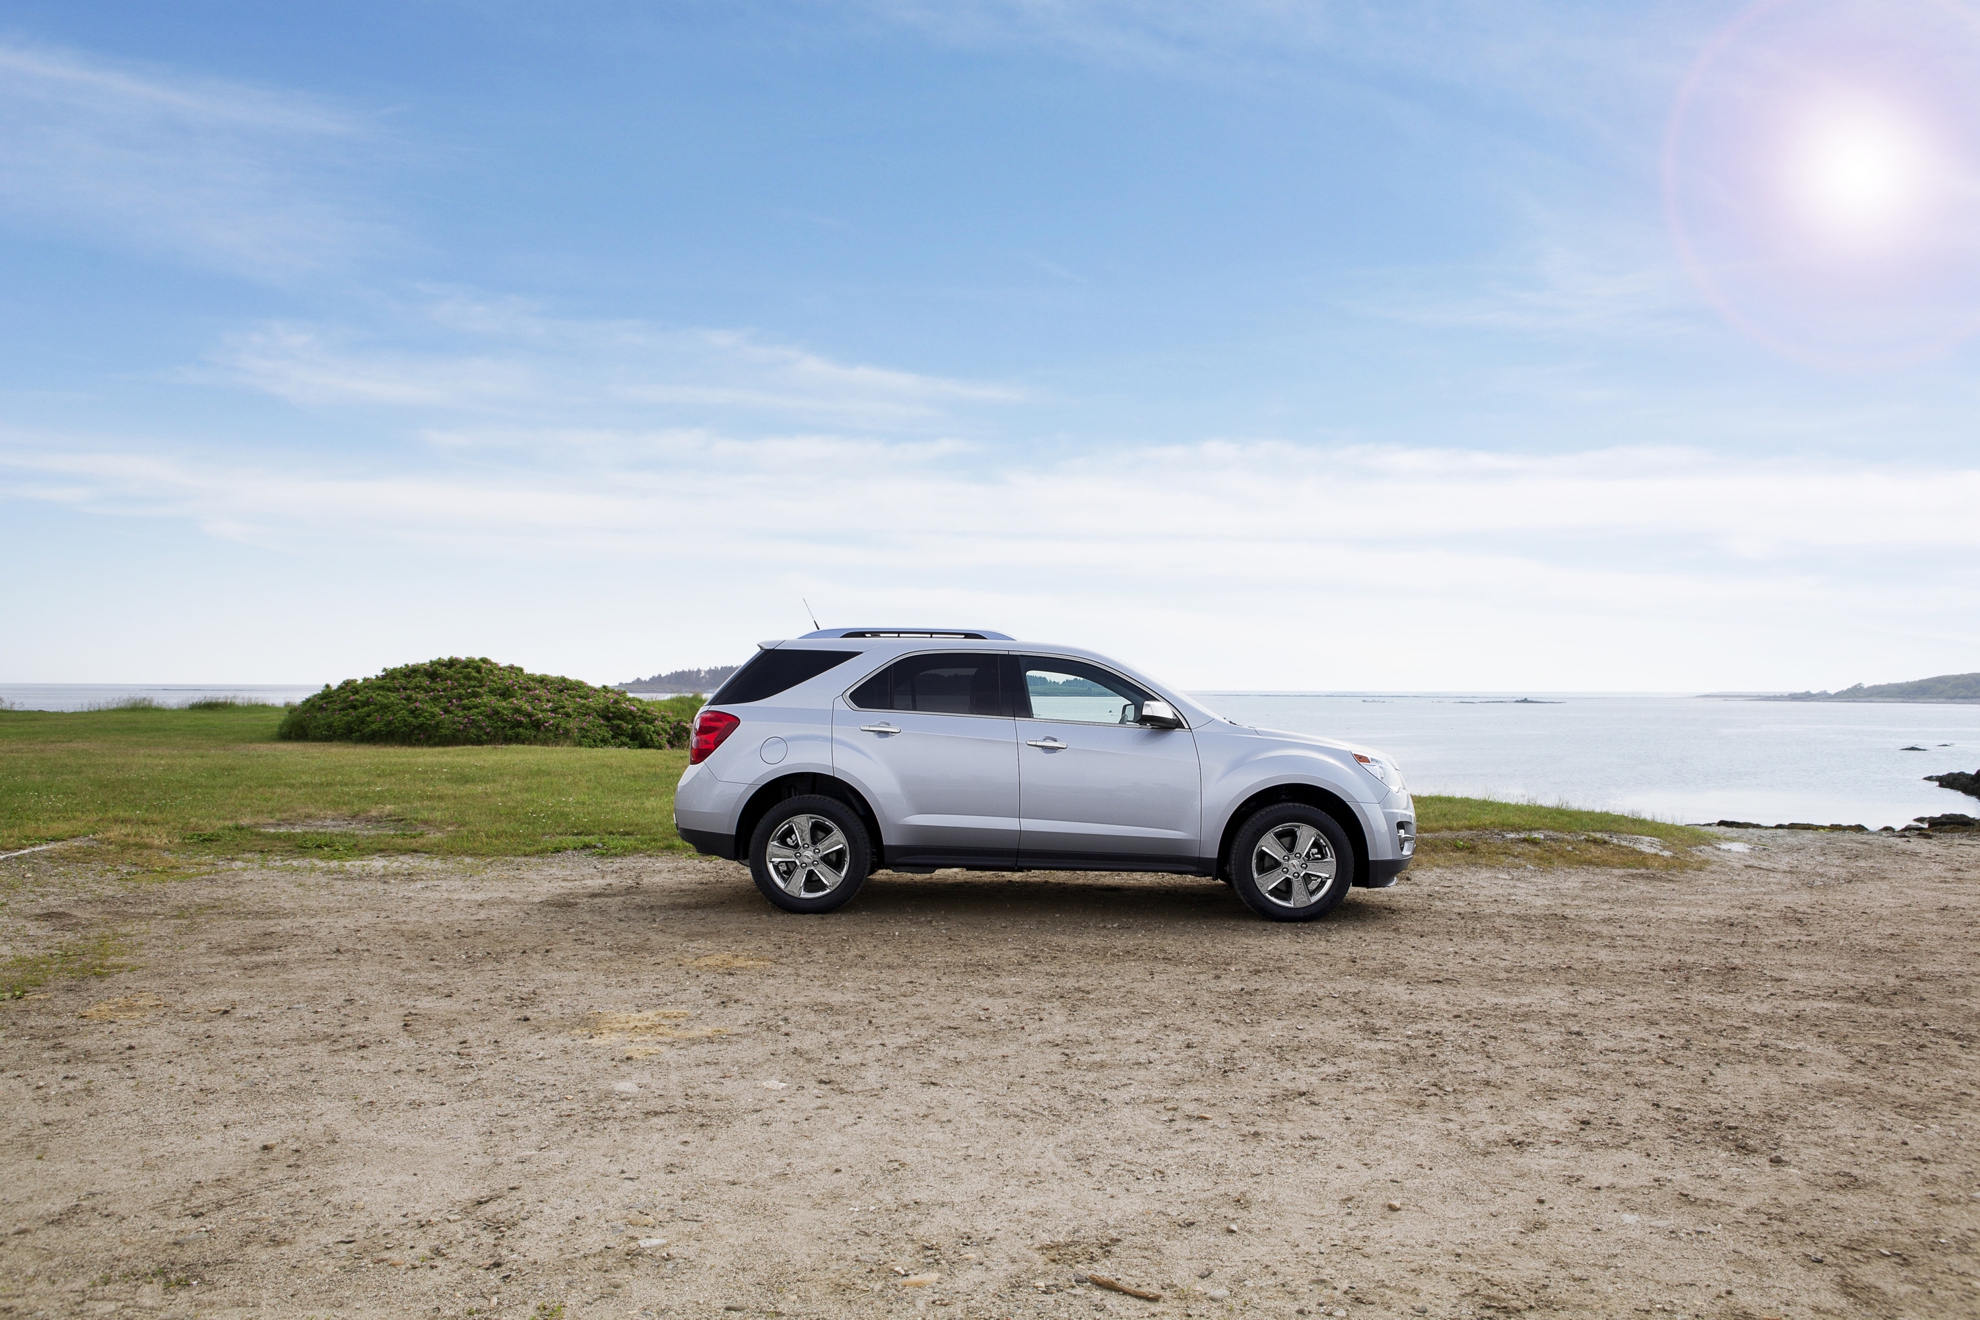 Chevrolet Equinox: Compact SUV Sales Still Rising After Five Years